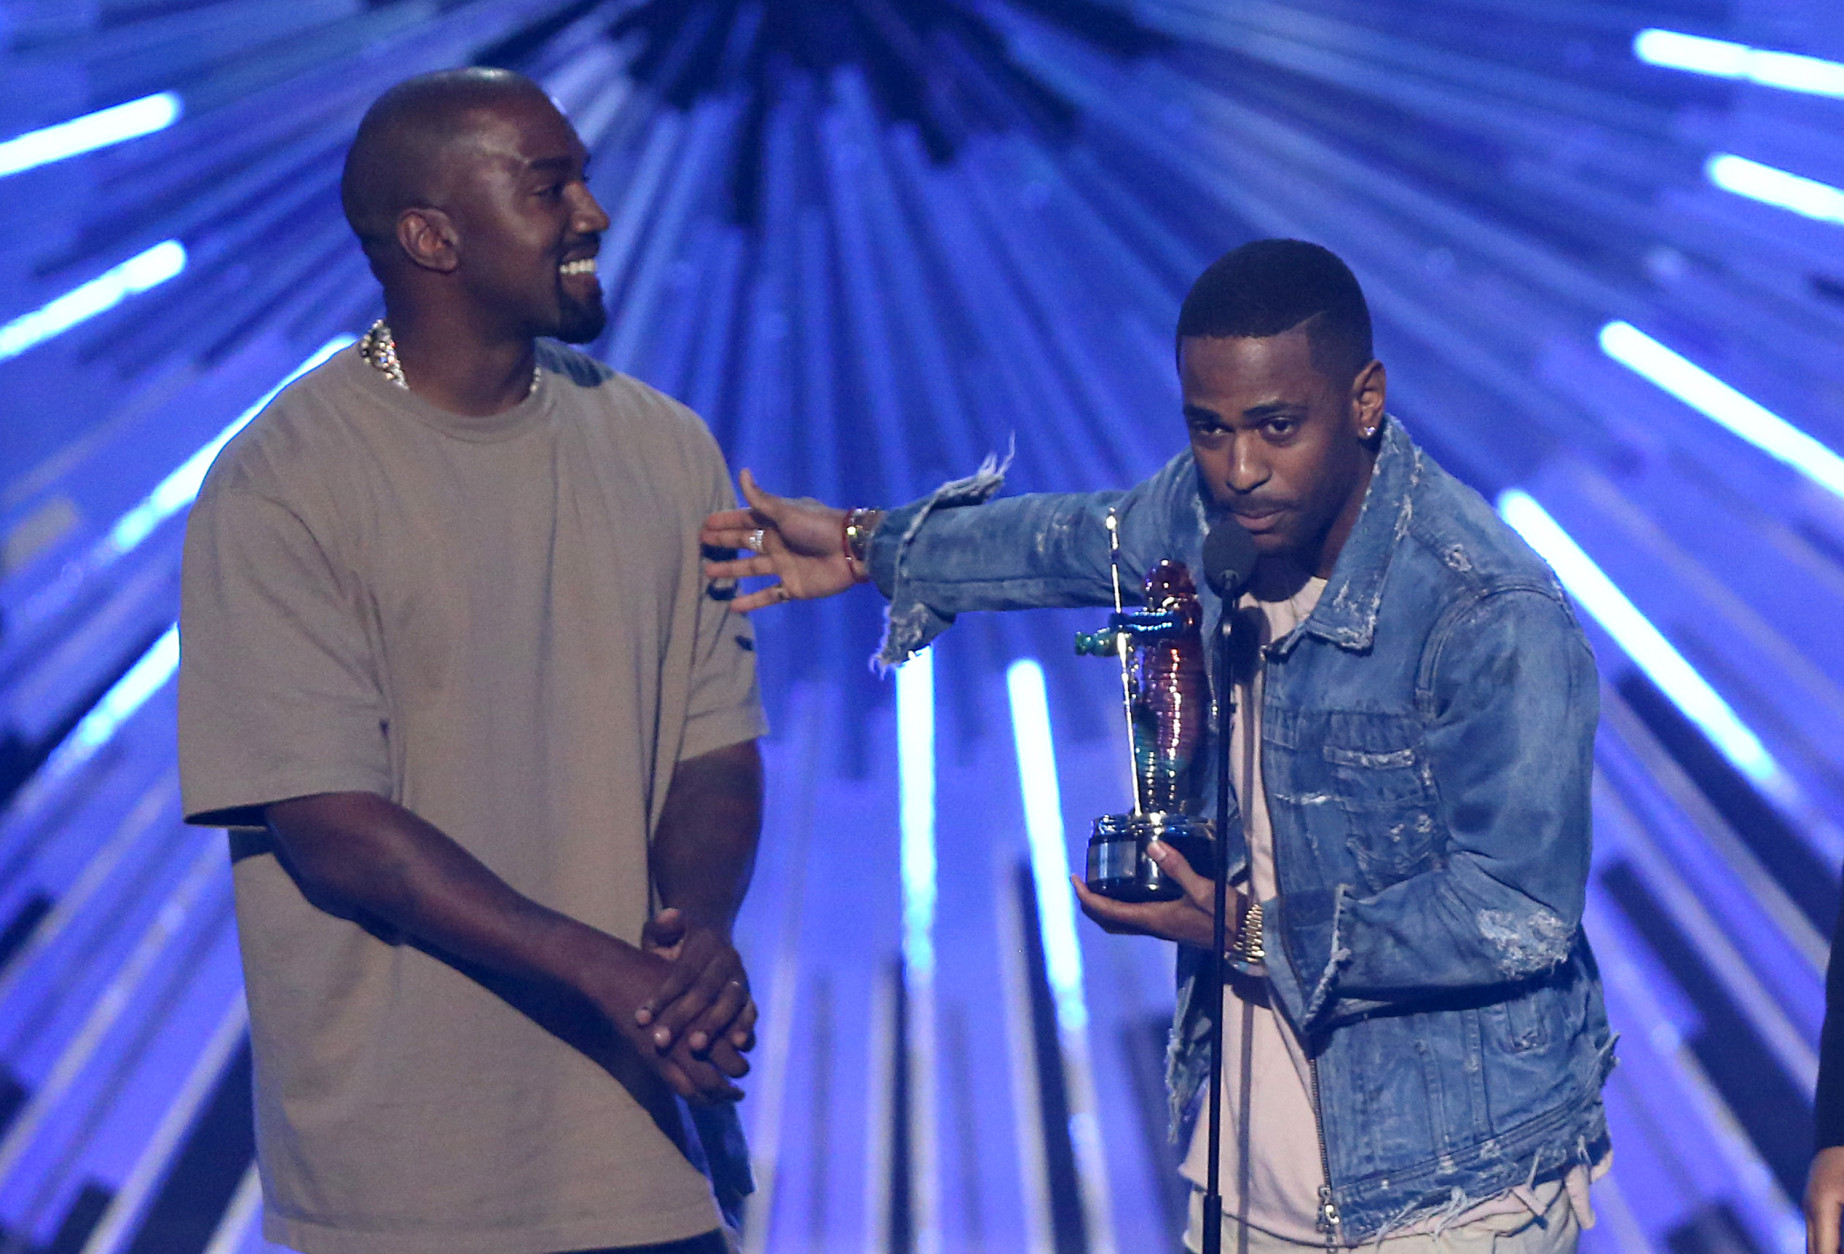 Kanye West, left, and Big Sean accept the award for video with a social message for One Man Can Change the World at the MTV Video Music Awards at the Microsoft Theater on Sunday, Aug. 30, 2015, in Los Angeles. (Photo by Matt Sayles/Invision/AP)